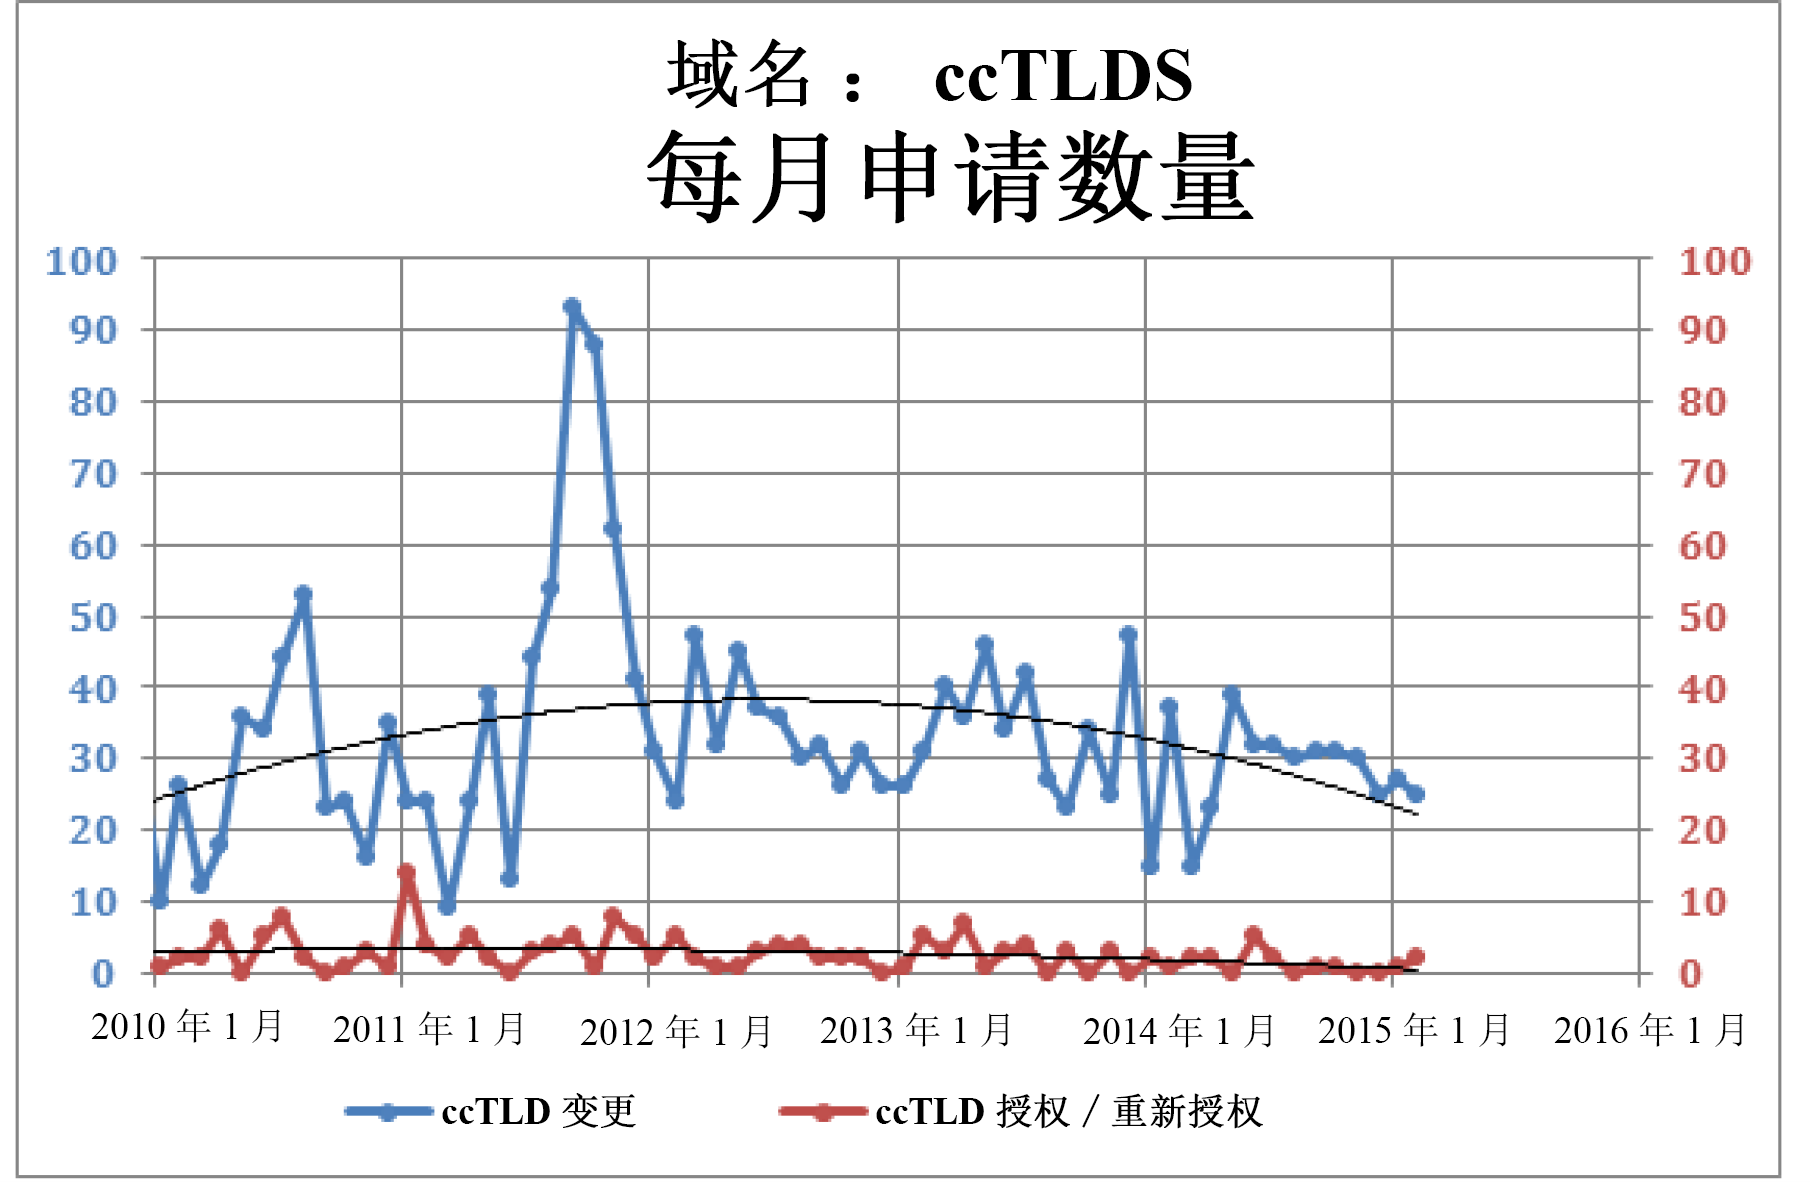 Names: ccTLDs Number of requests per month